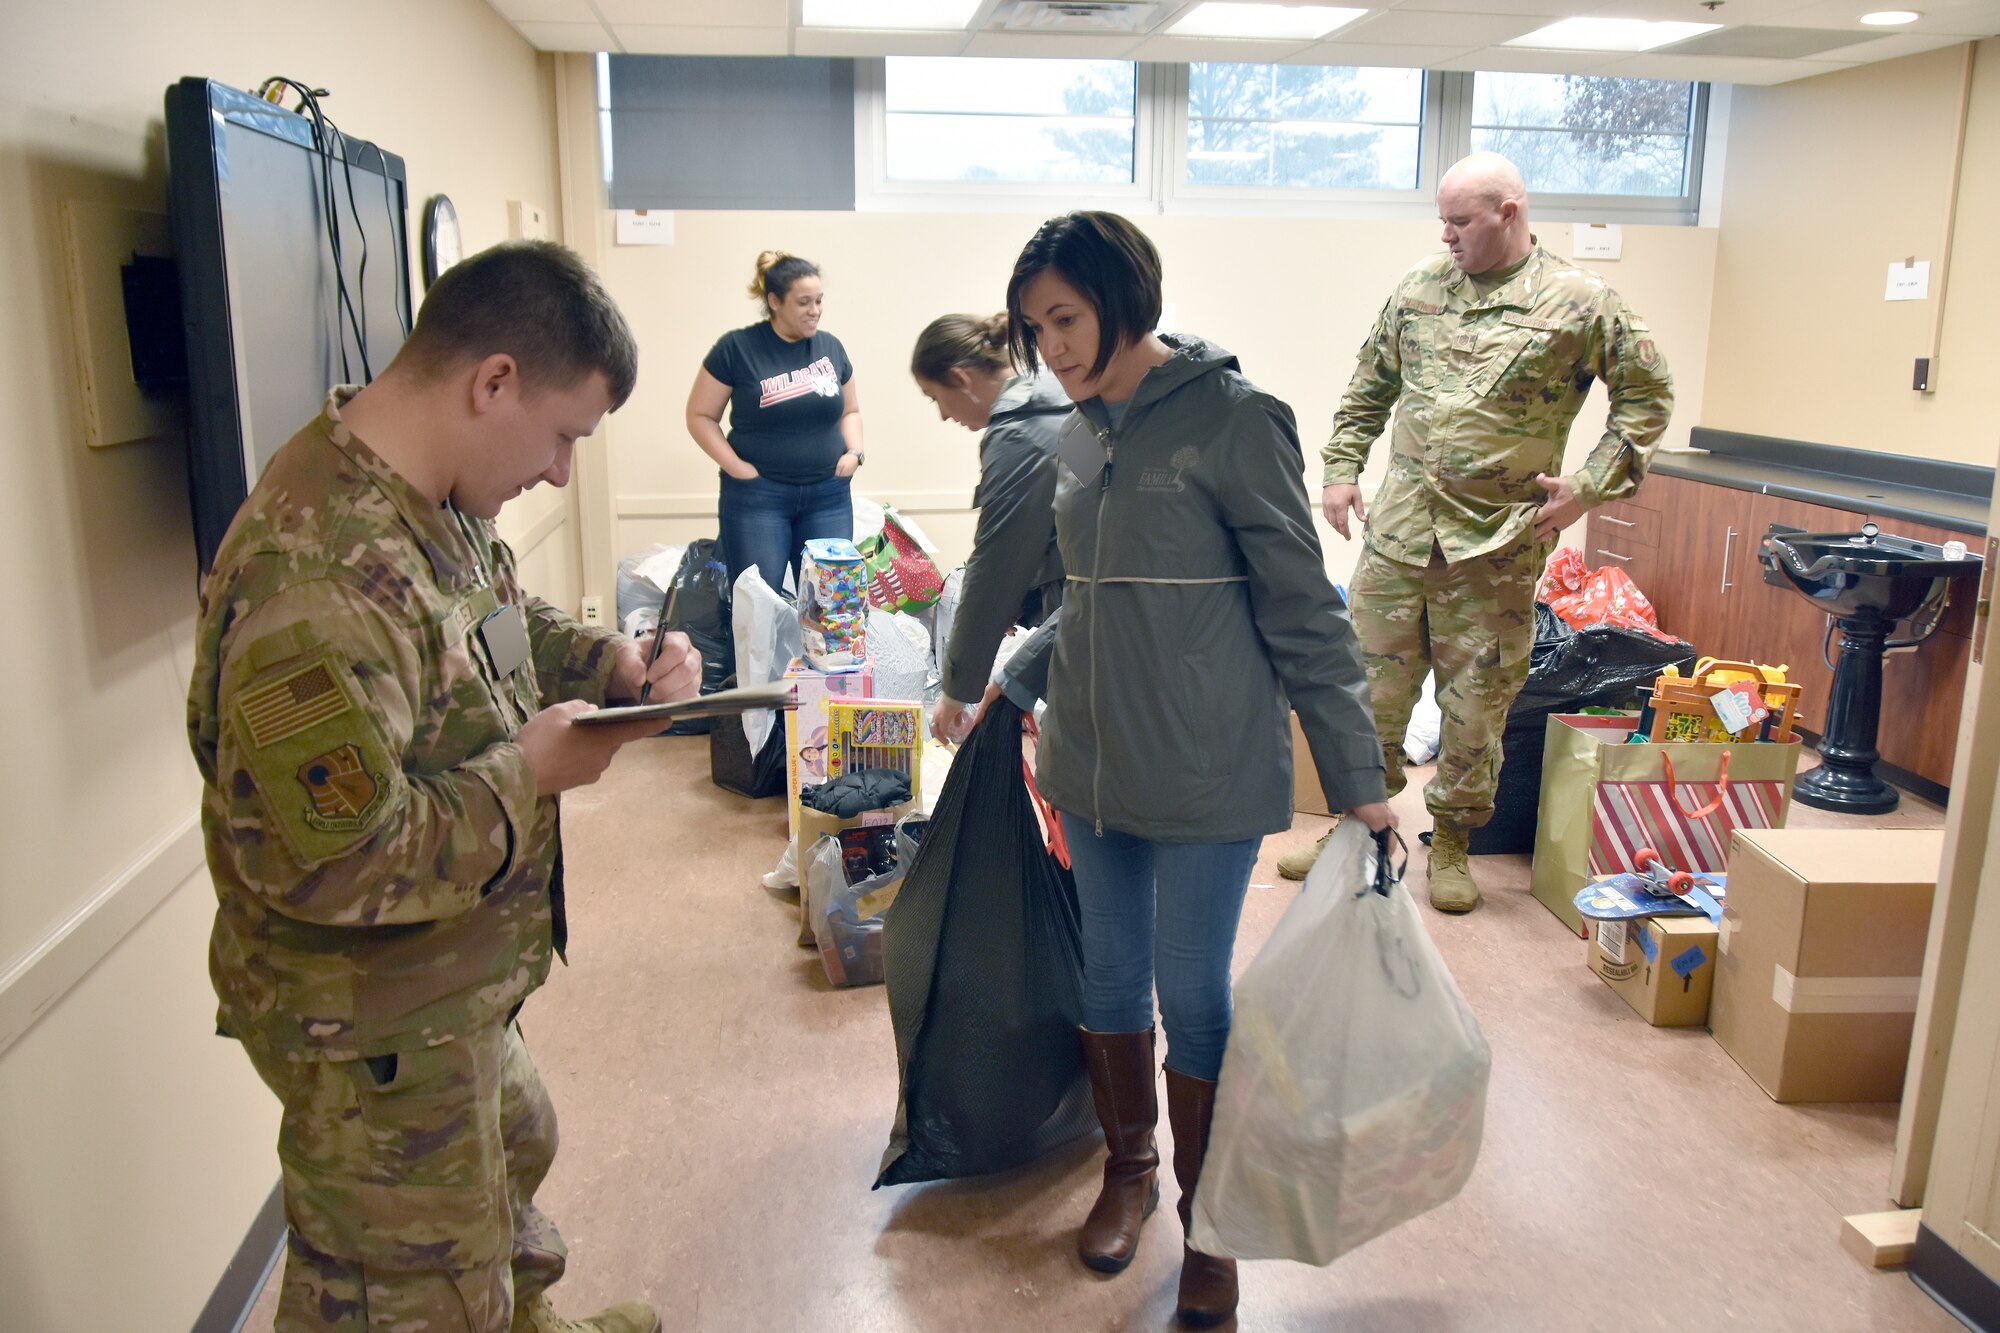 Master Sgt. Anthony Velez, Arnold Engineering Development Complex senior munitions inspector, left, checks off the gifts collected and readied for transport by Heather Richards from the Center for Family Development in Shelbyville, Dec. 14, 2022, at Arnold Air Force Base, Tennessee. Center staff and volunteers visited Arnold AFB to collect gifts purchased by base personnel during the 2022 AEDC Gift Sponsor toy drive, previously known as the AEDC Angel Tree, Dec. 14, 2022. Members of the Arnold workforce sponsored more than 150 area children this year to provide them with gifts for Christmas. (U.S. Air Force photo by Bradley Hicks) (This image was altered by obscuring badges for security purposes.)